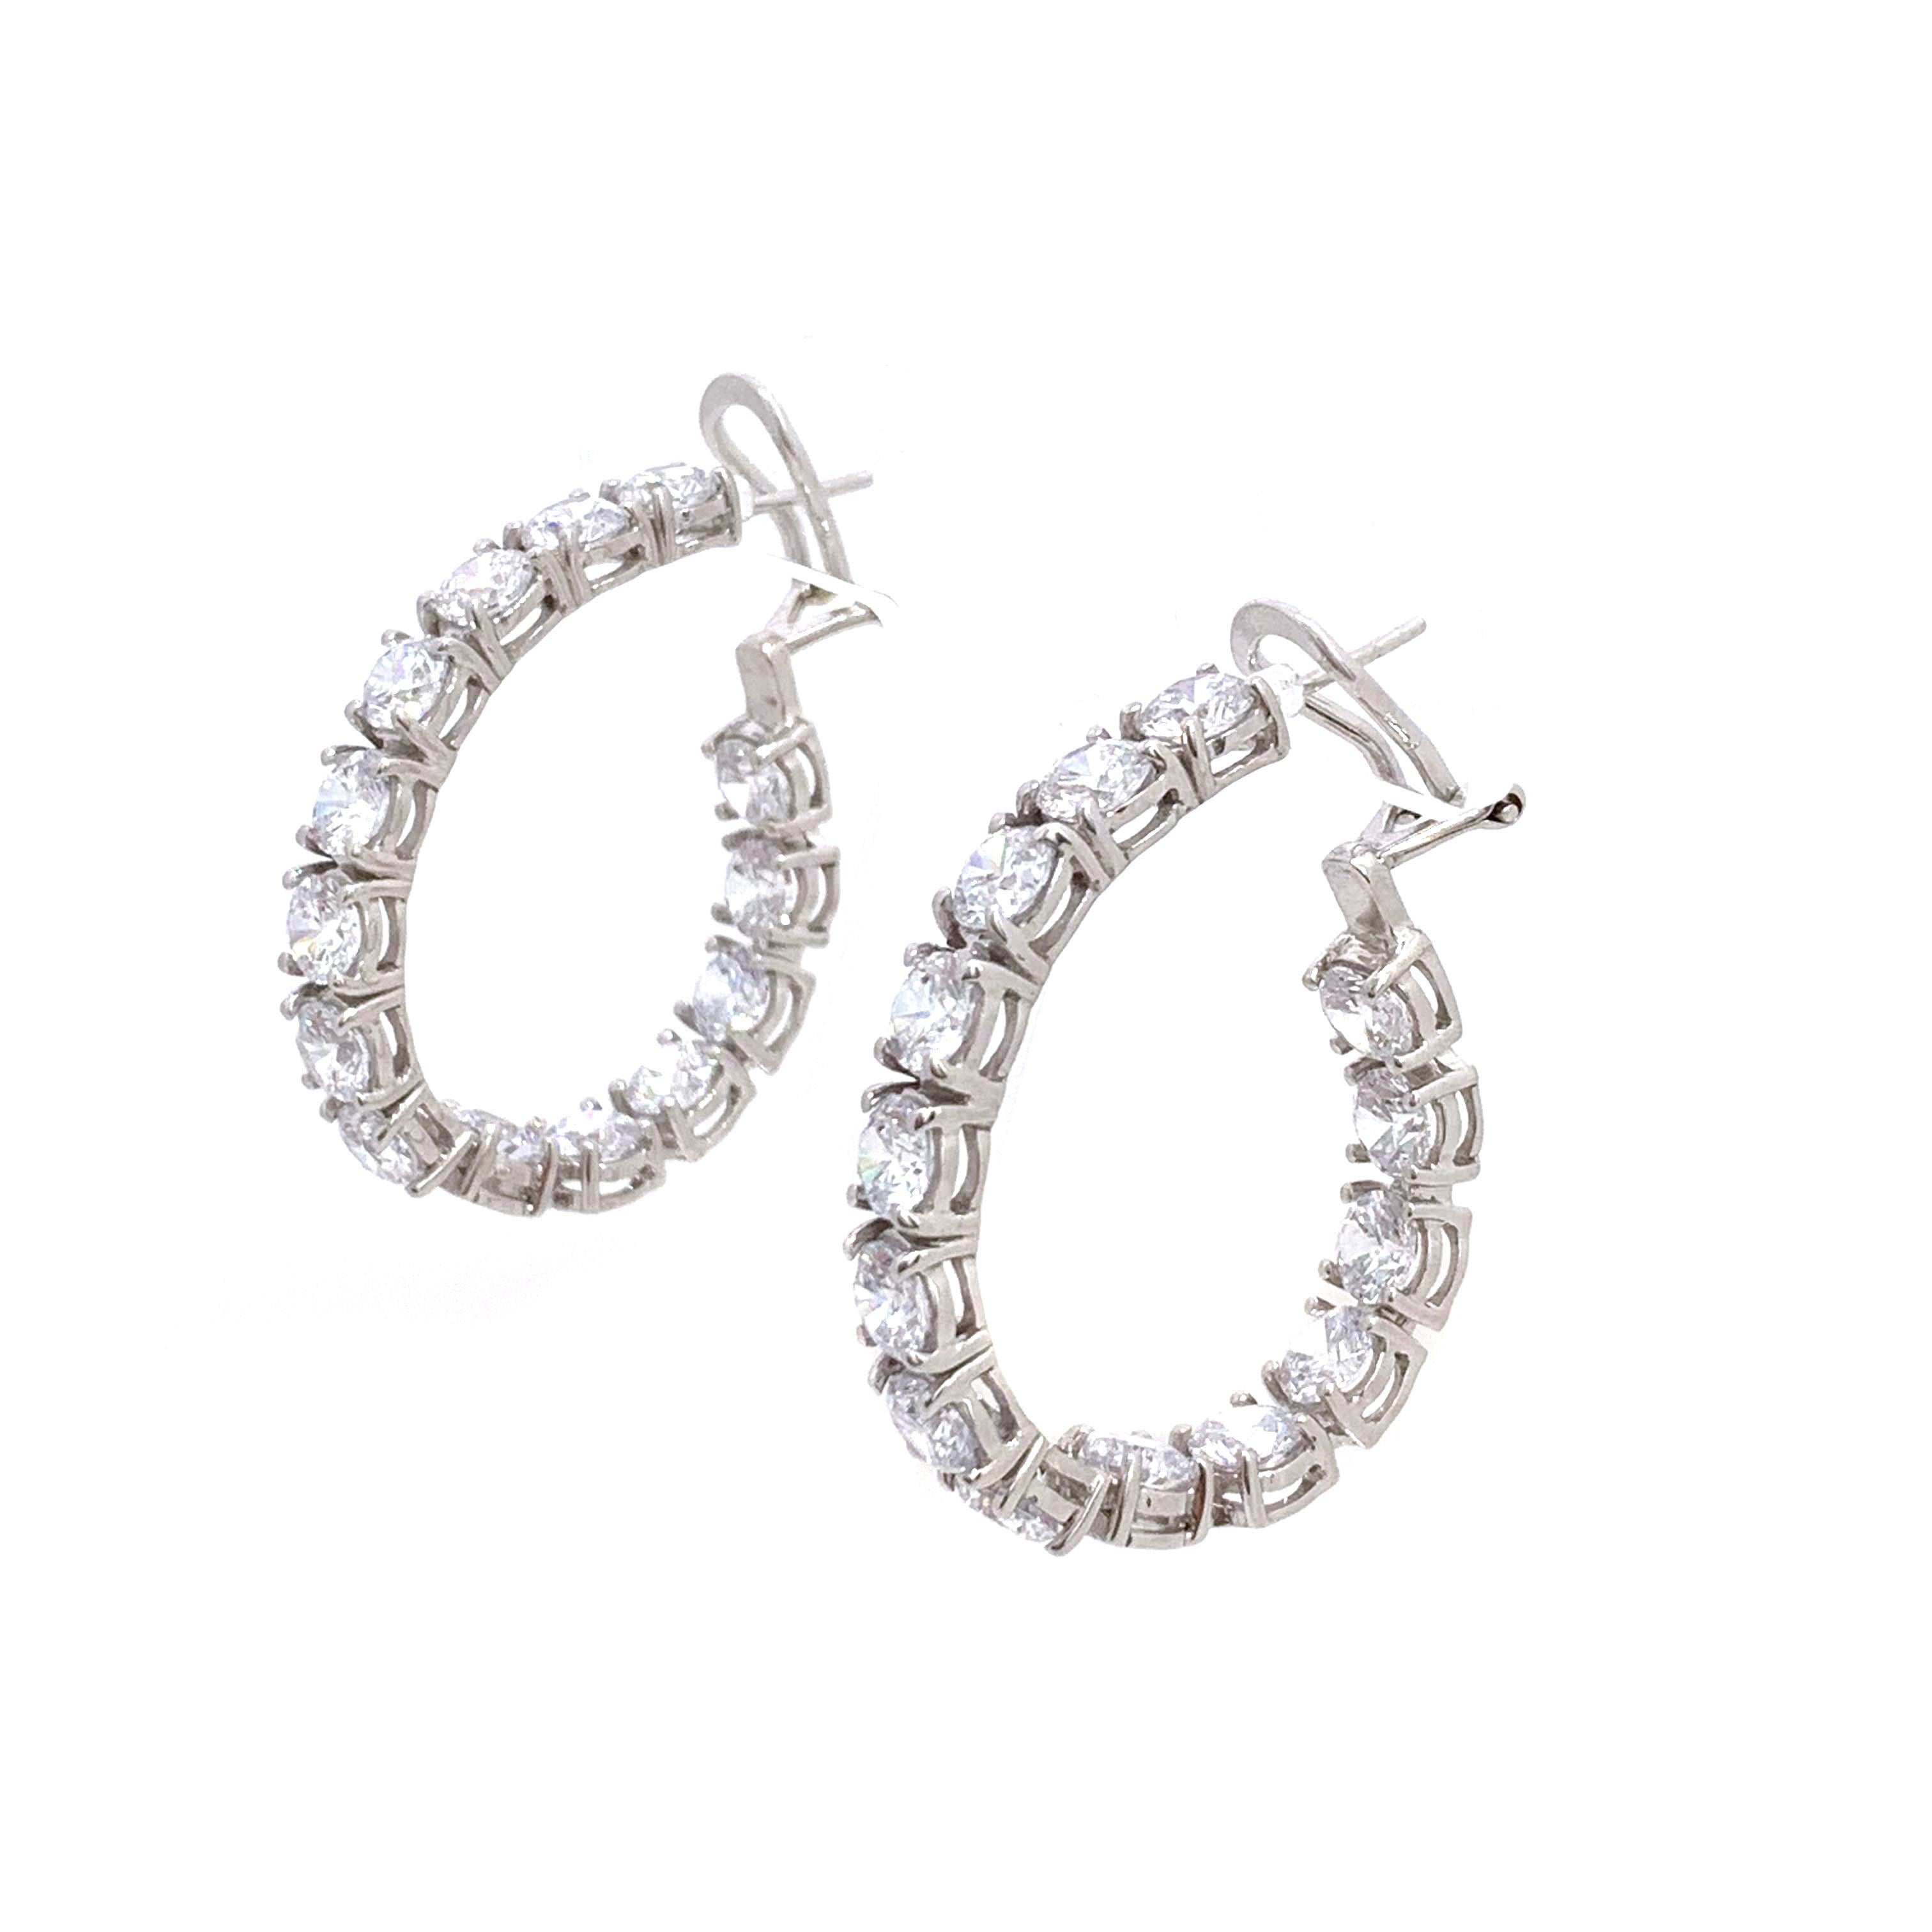 Stunning Simulated Diamond Sterling Silver Hoop Earrings In New Condition For Sale In Los Angeles, CA